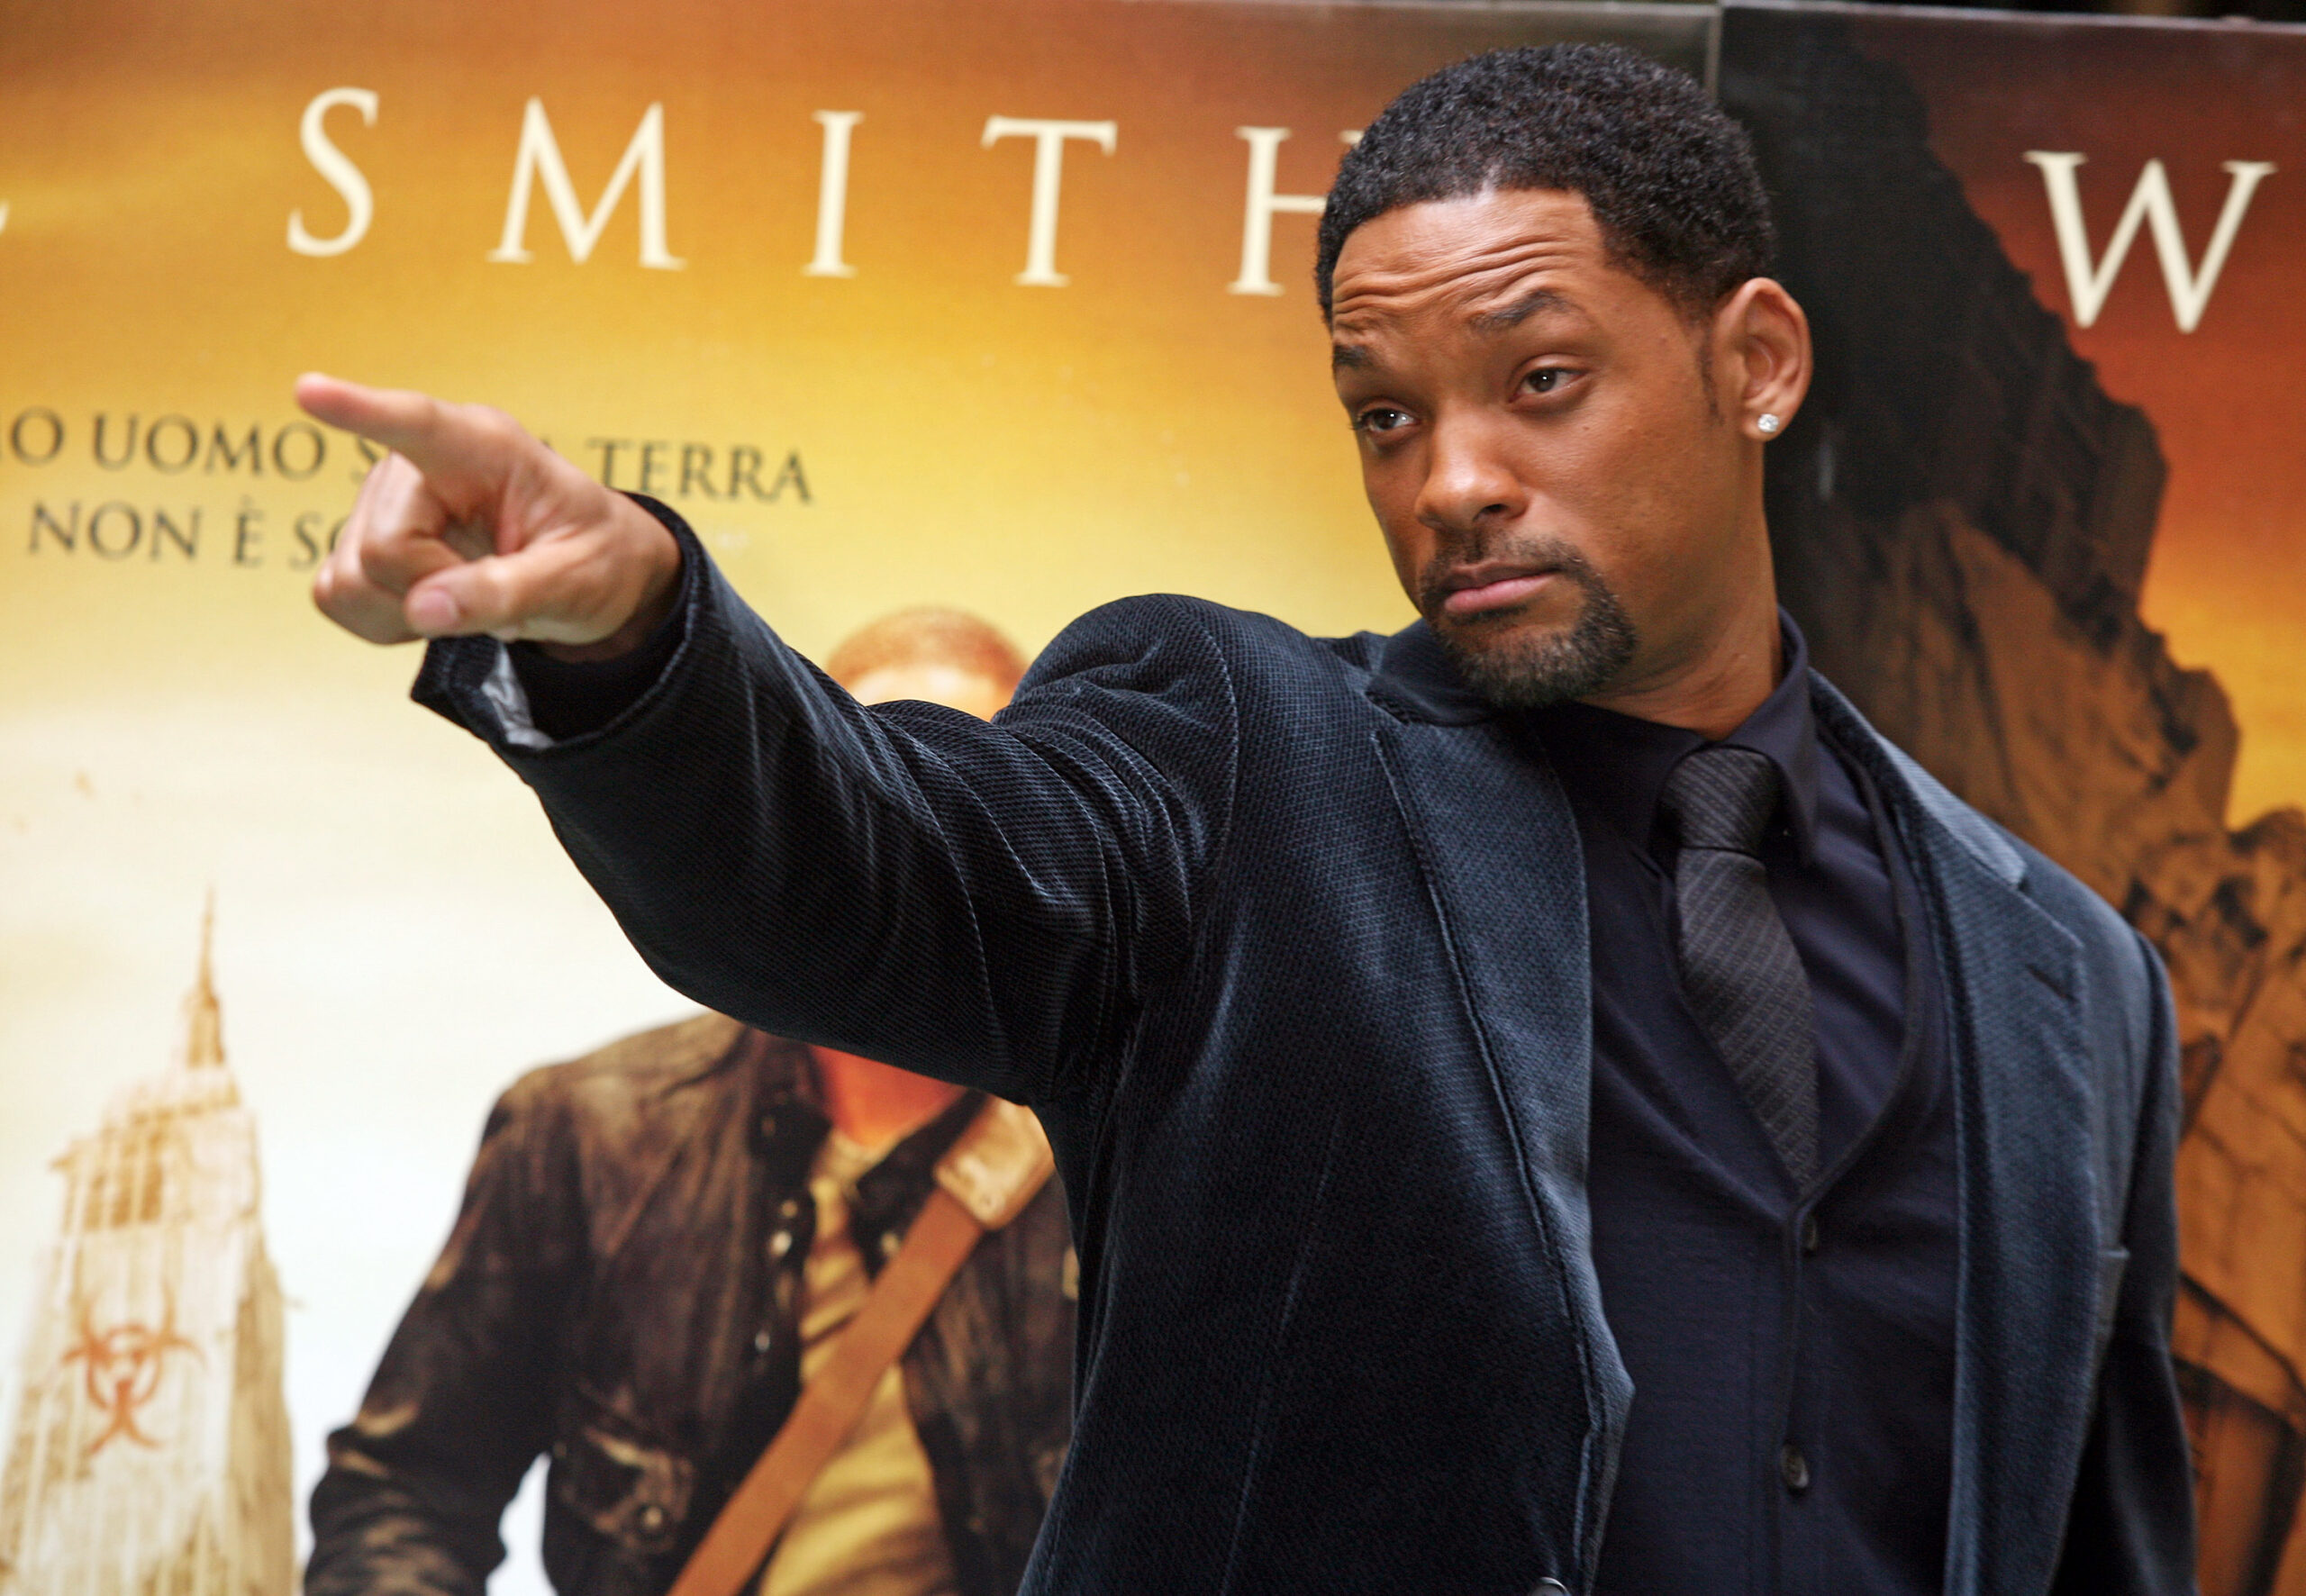 I Am Legend sequel, Cool story idea, Will Smith's return, Exciting storyline, 2560x1780 HD Desktop